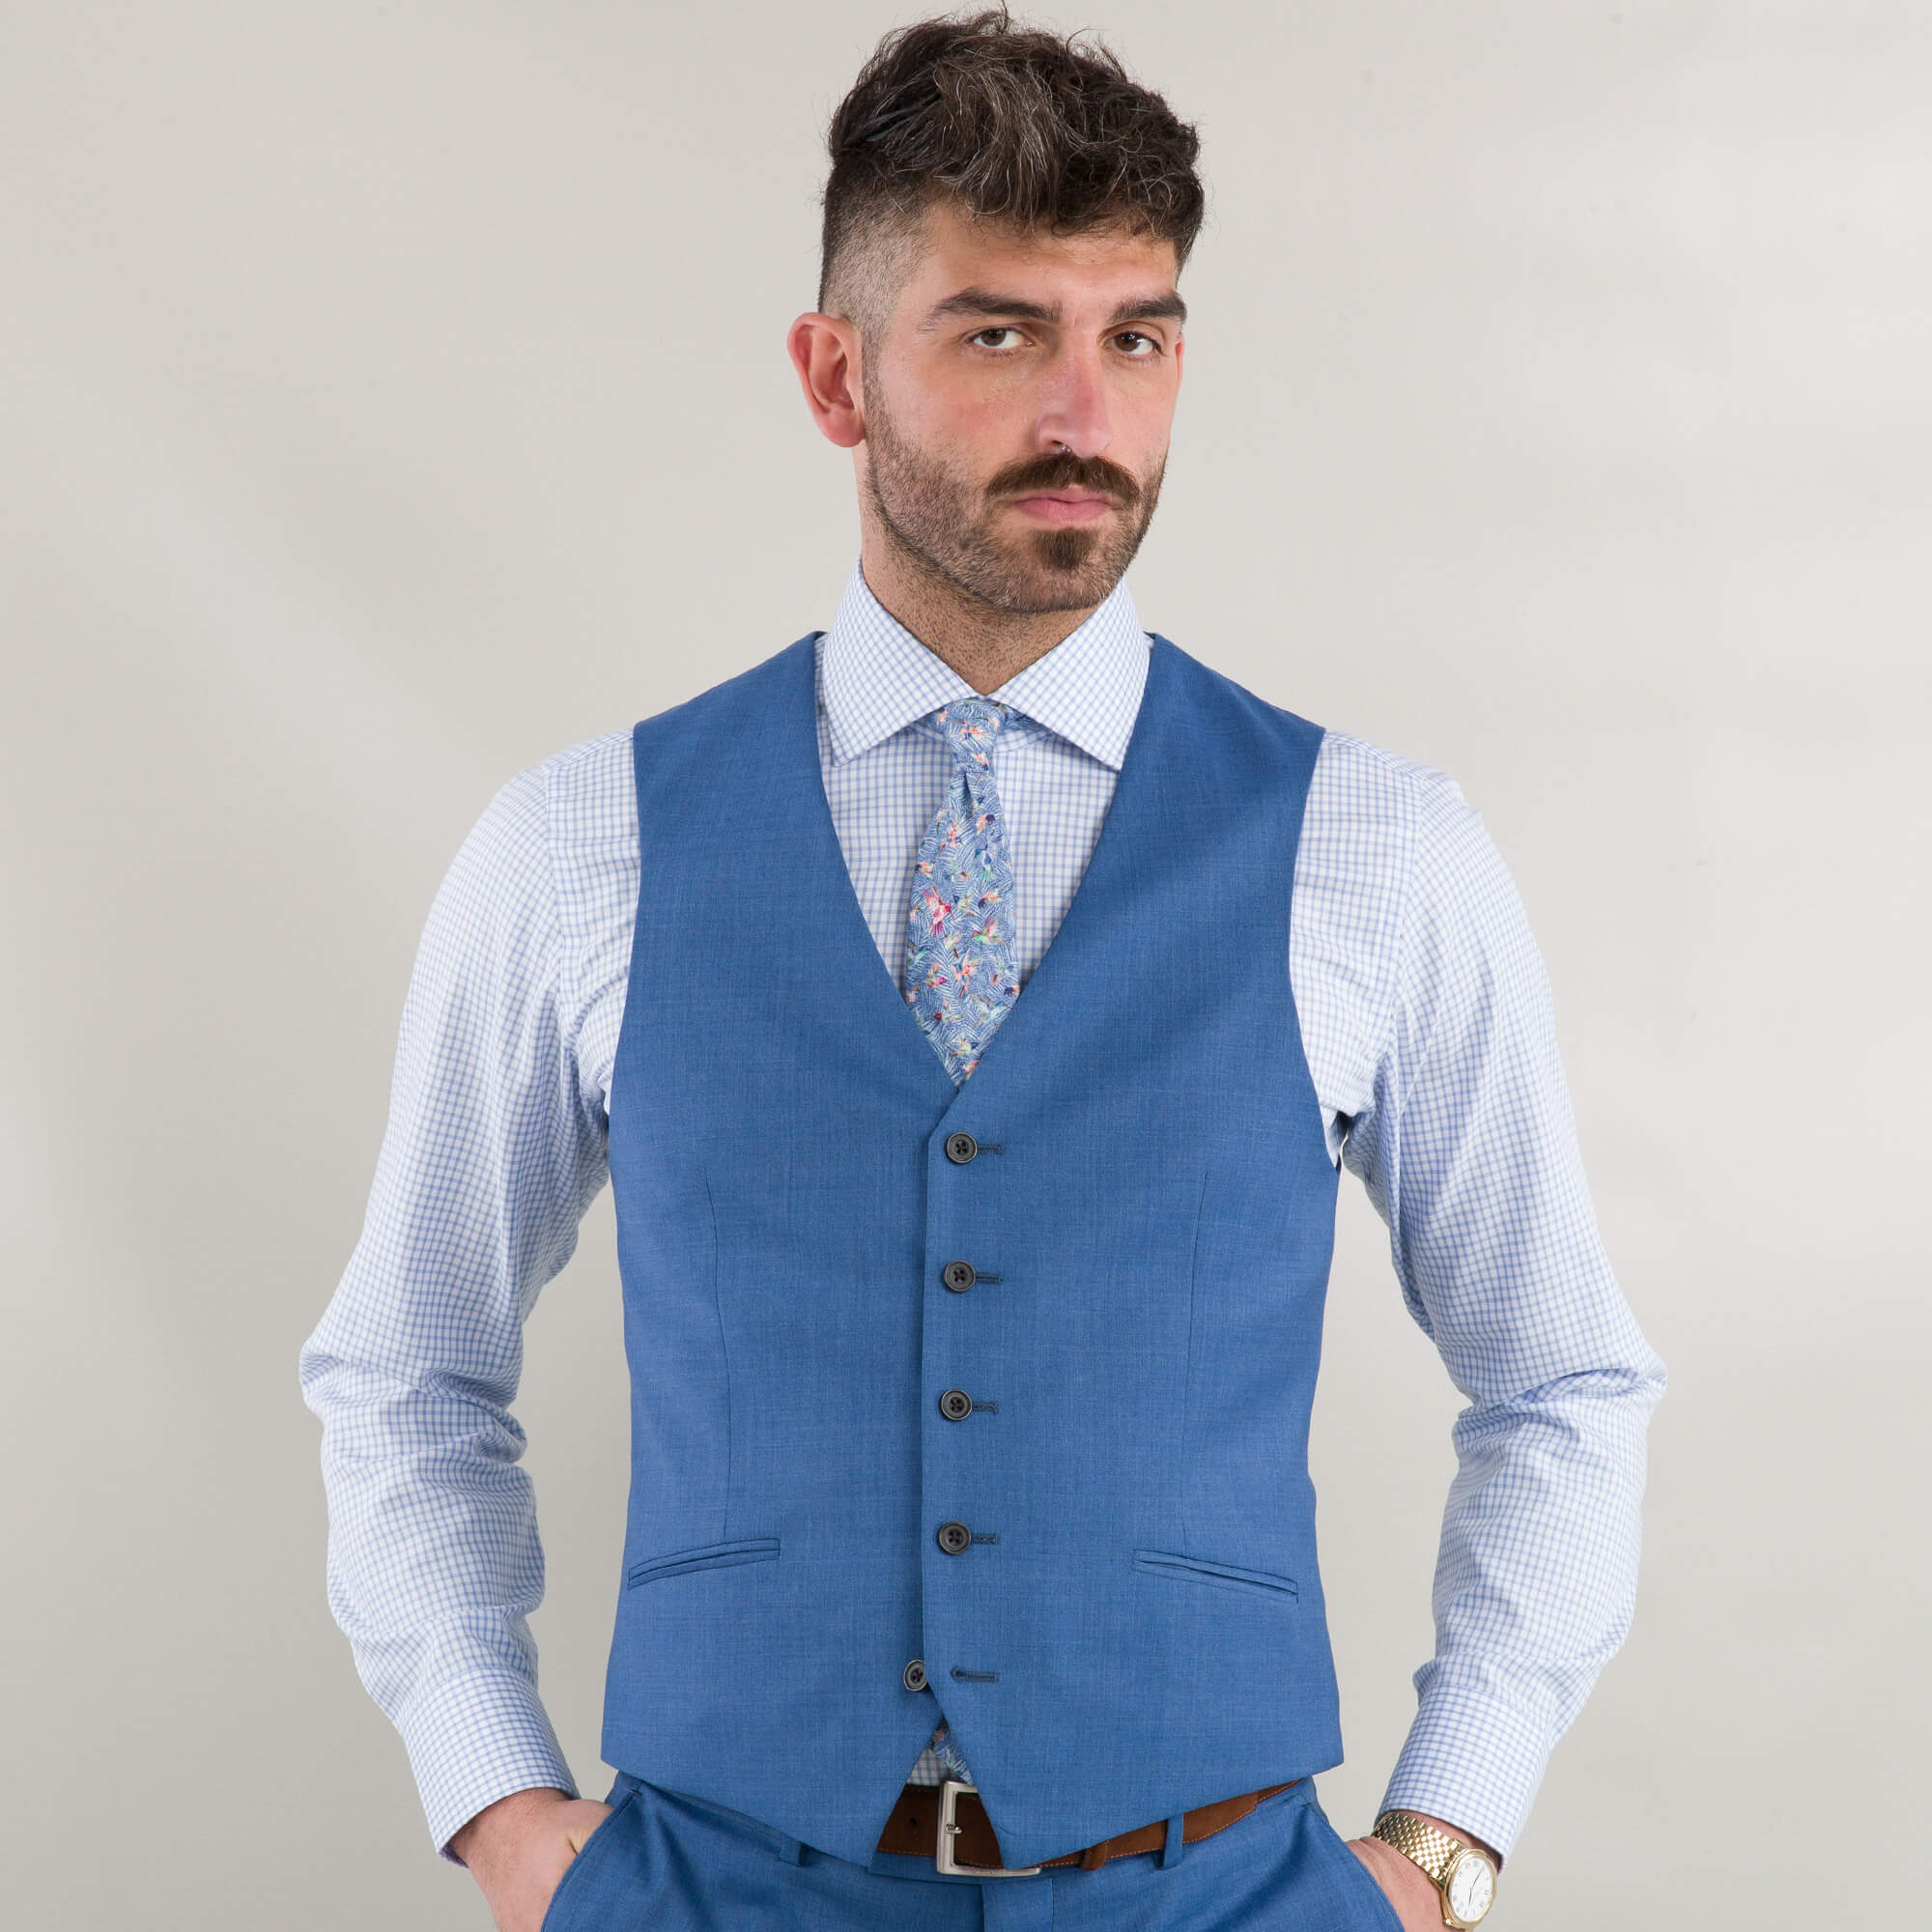 Waistcoats Are Trending: Here's The Best Styles To Shop